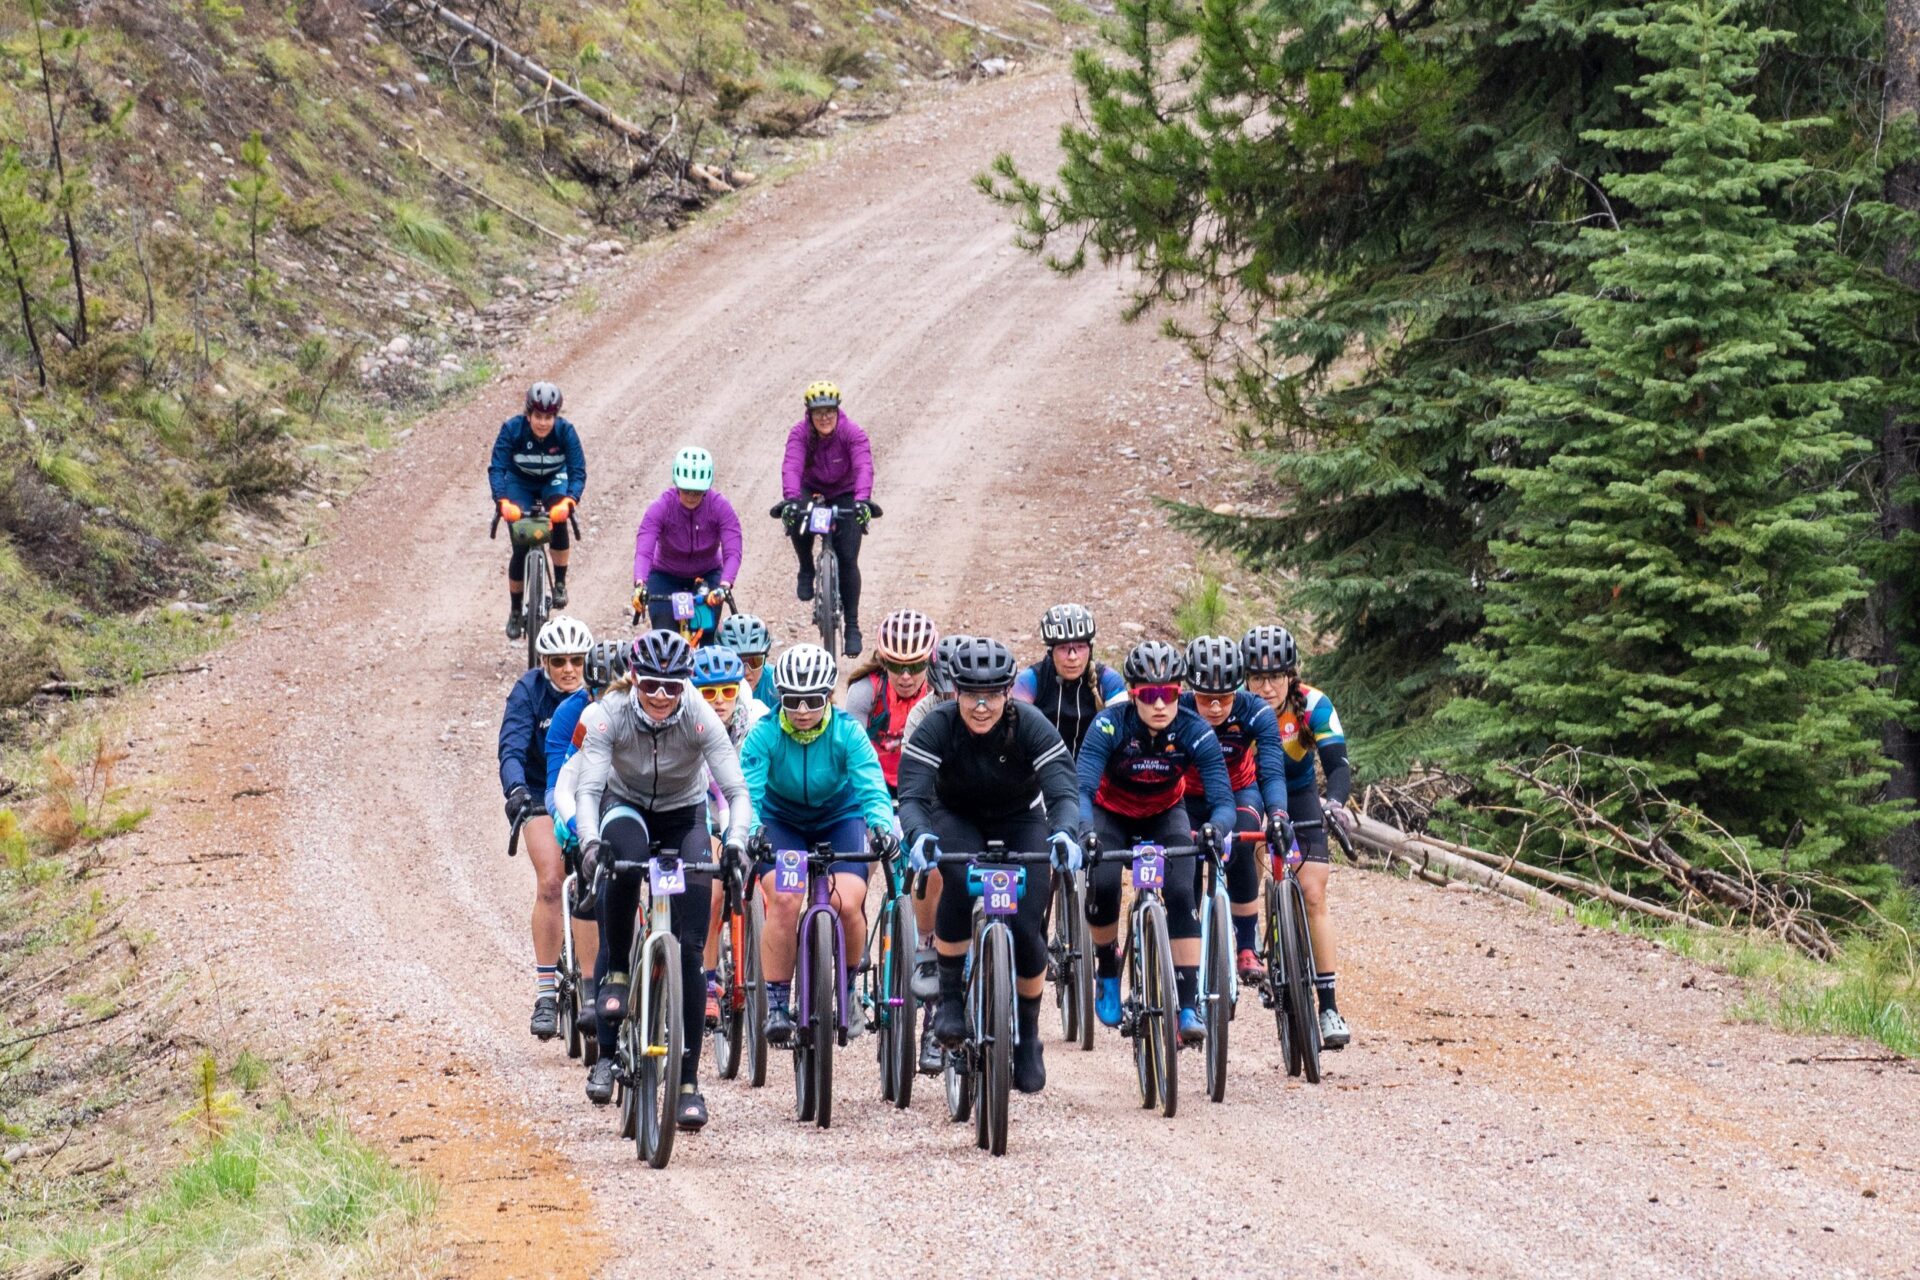 Pack of riders on Dusty Bandista Gravel course